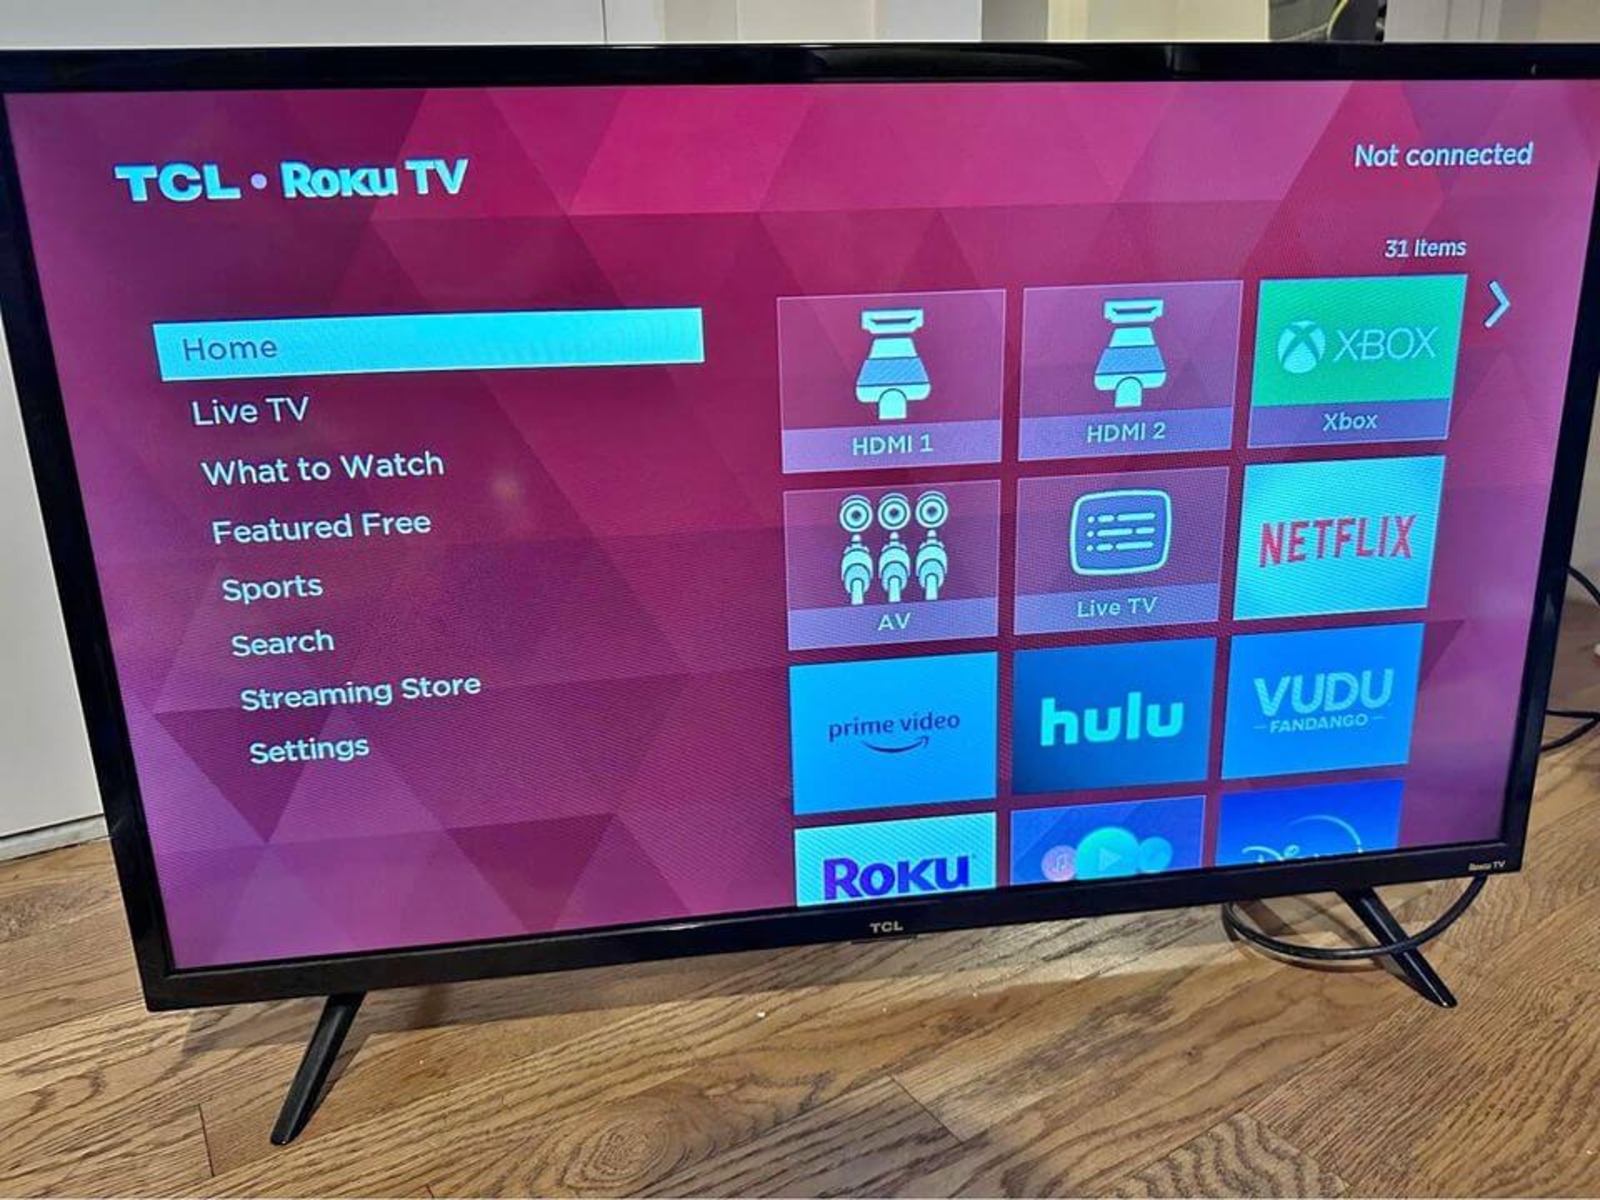 How To Switch HDMI On TCL Roku TV